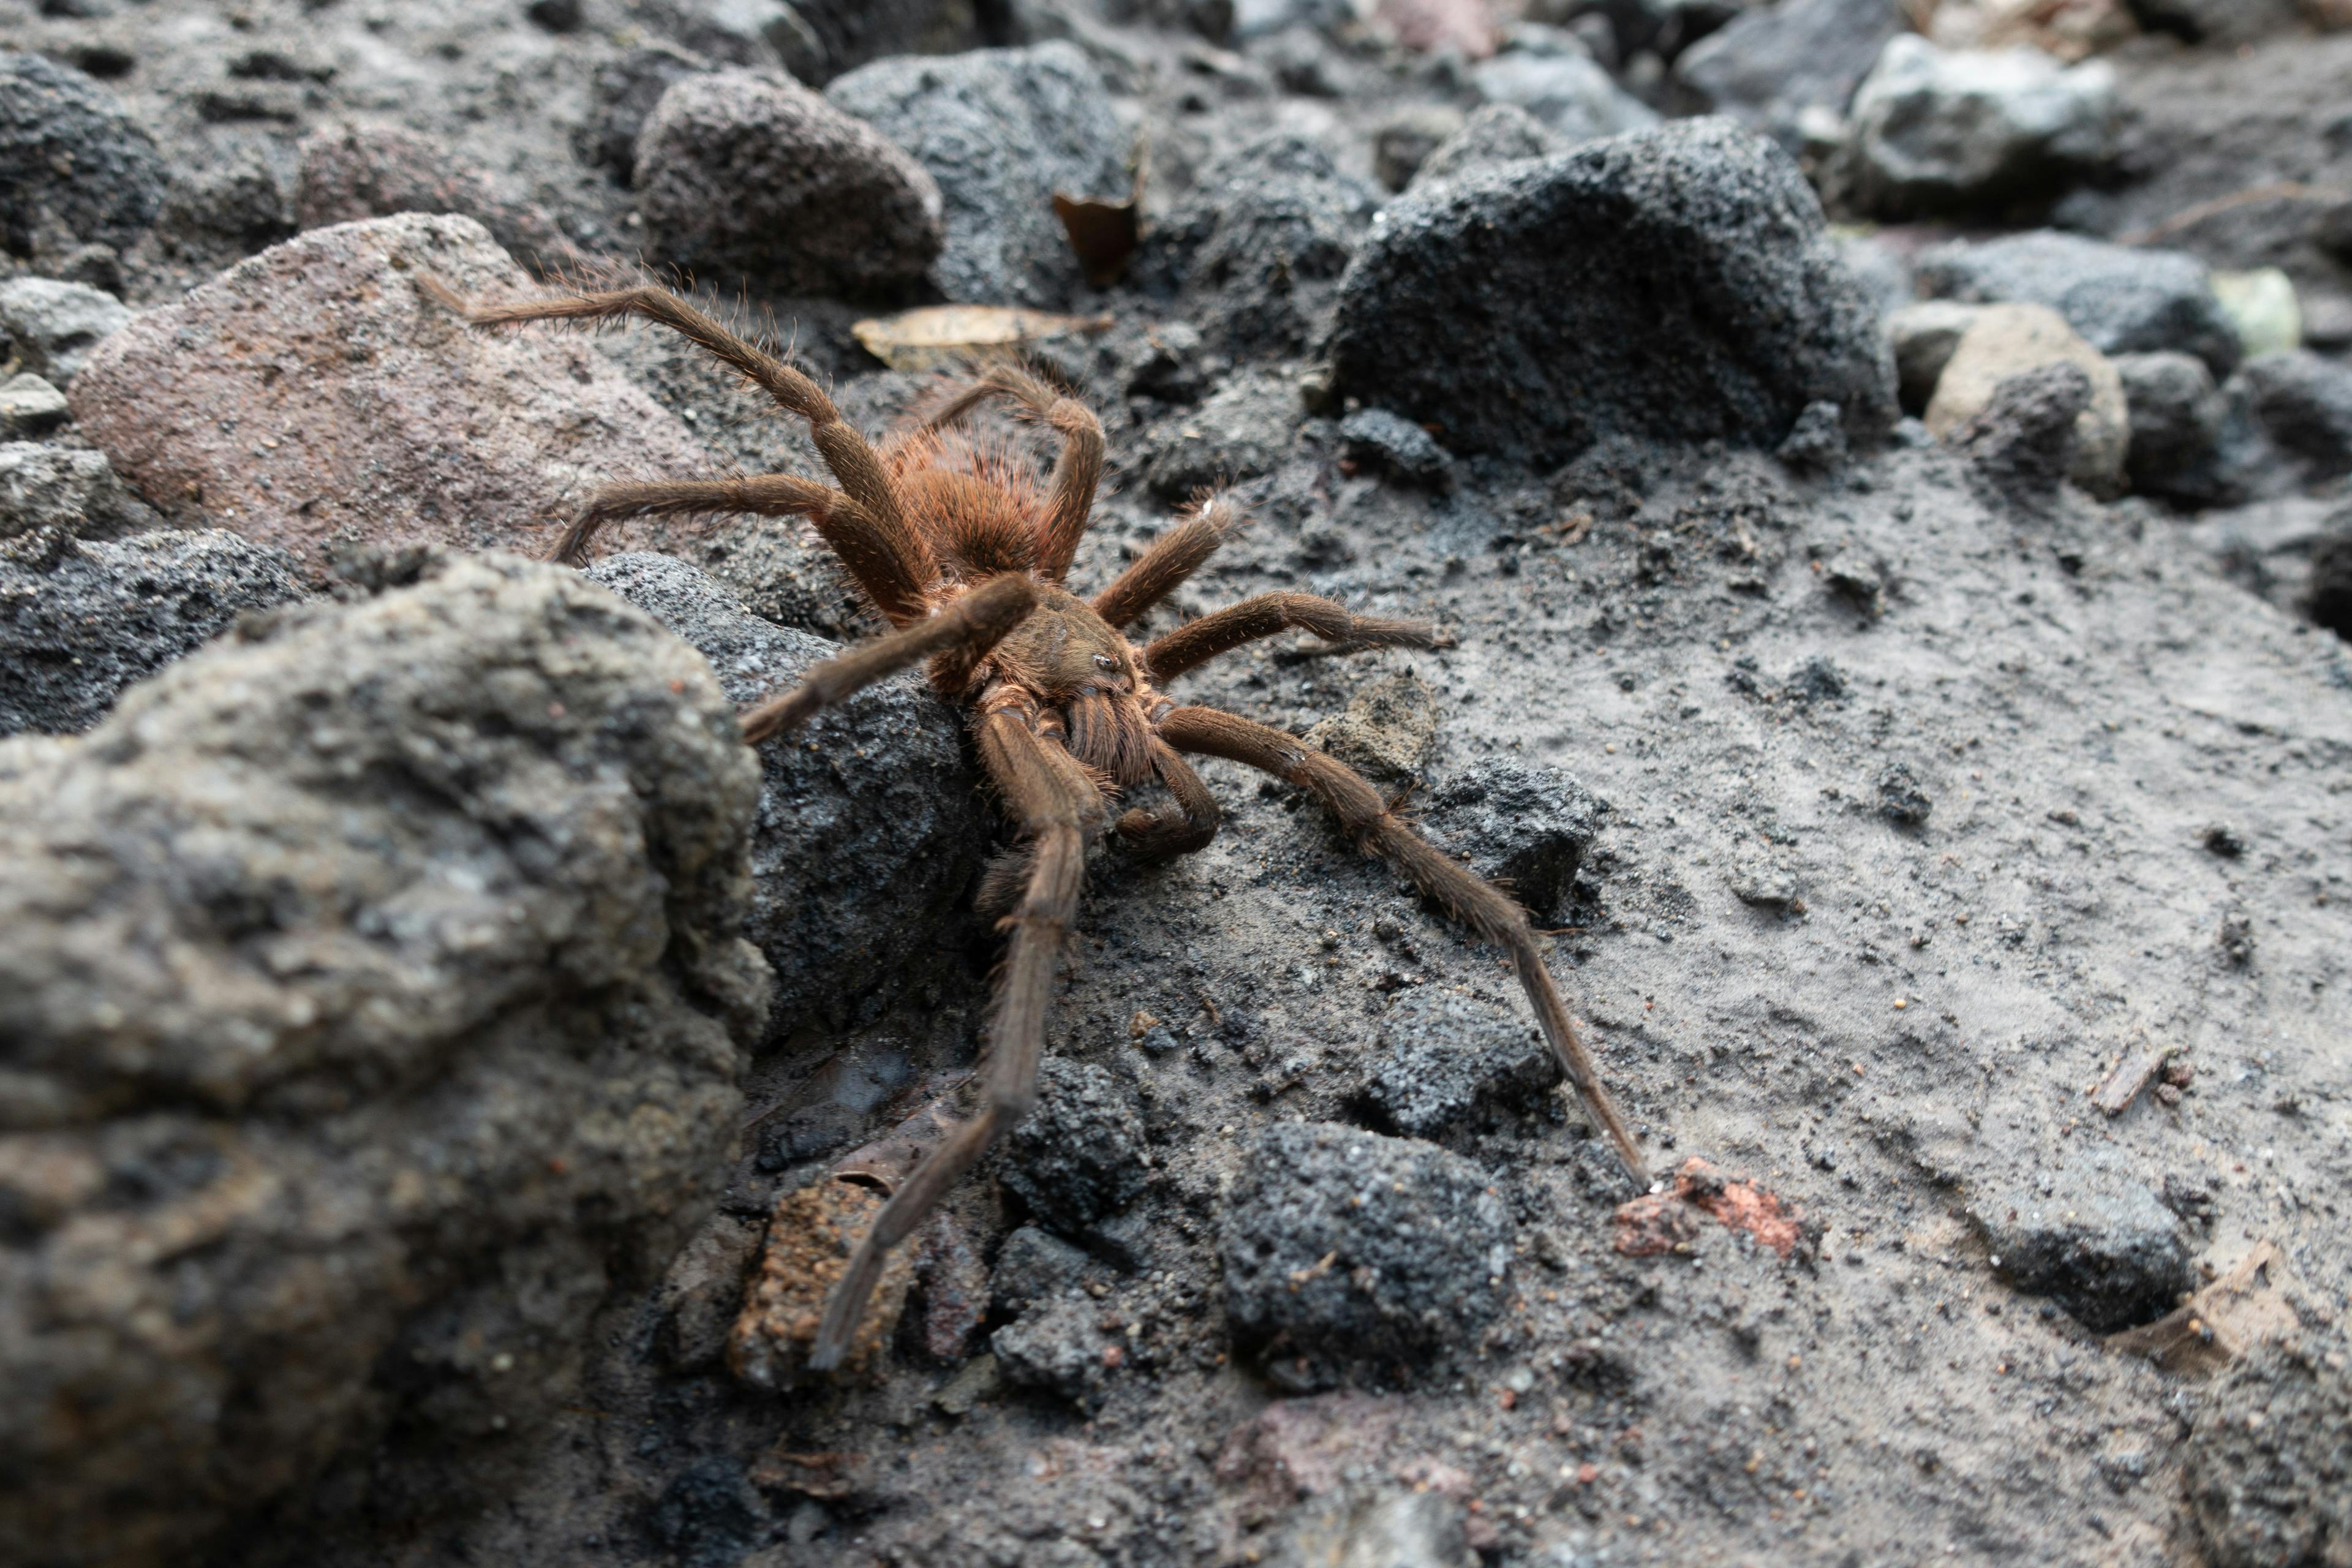 A wild tarantula. They are way cuter in person, and not nearly as deadly as Hollywood makes them out to be